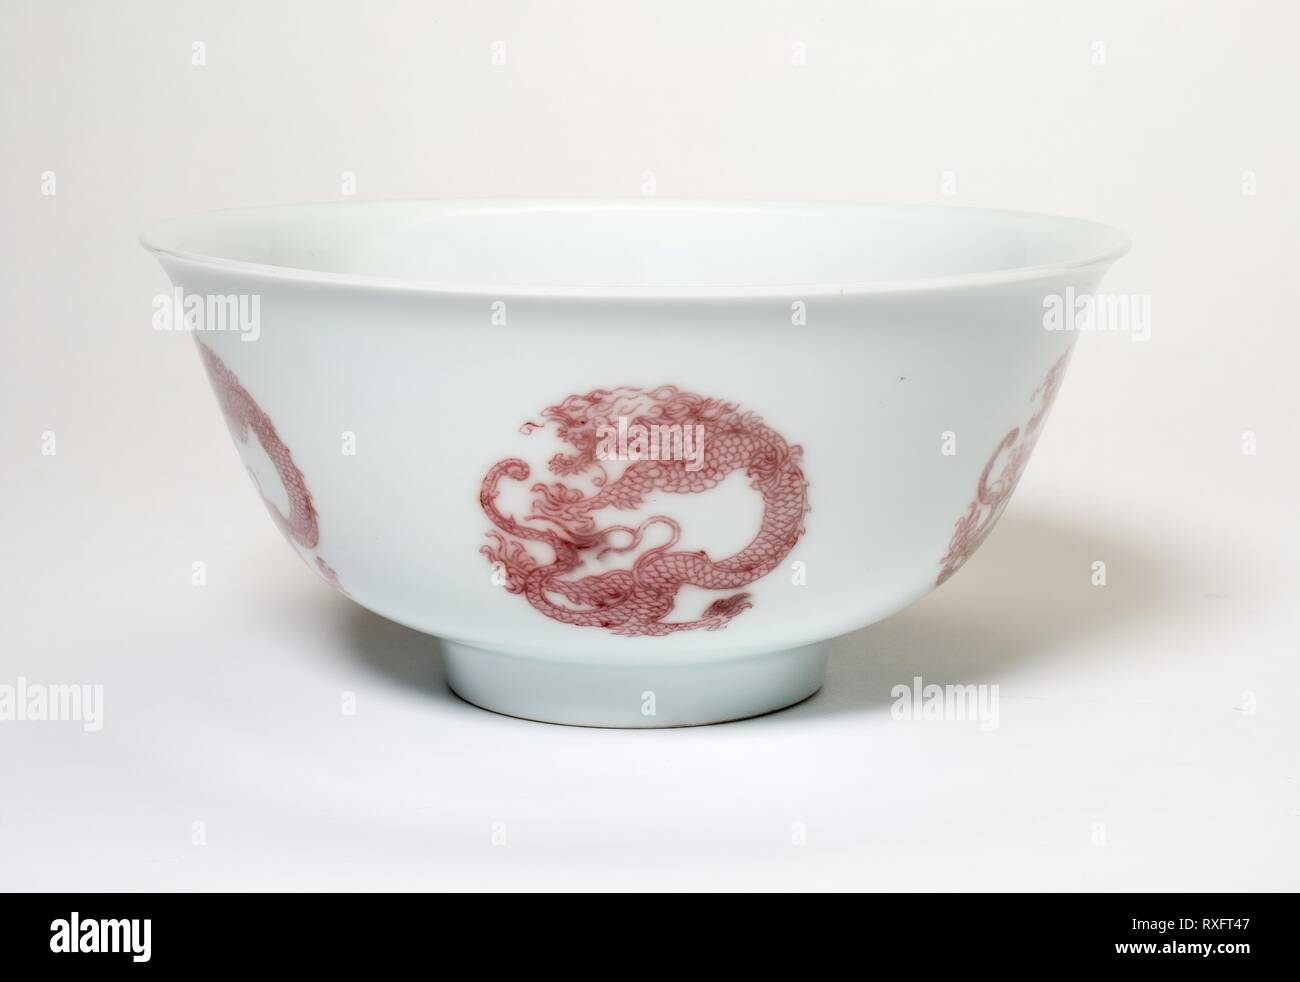 Bowl with Six Dragon Medallions. China. Date: 1662-1722. Dimensions: H. 7.0 cm (2 3/4 in.); diam. 14.9 cm (5 7/8 in.). Porcelain painted in underglaze copper red. Origin: China. Museum: The Chicago Art Institute. Stock Photo